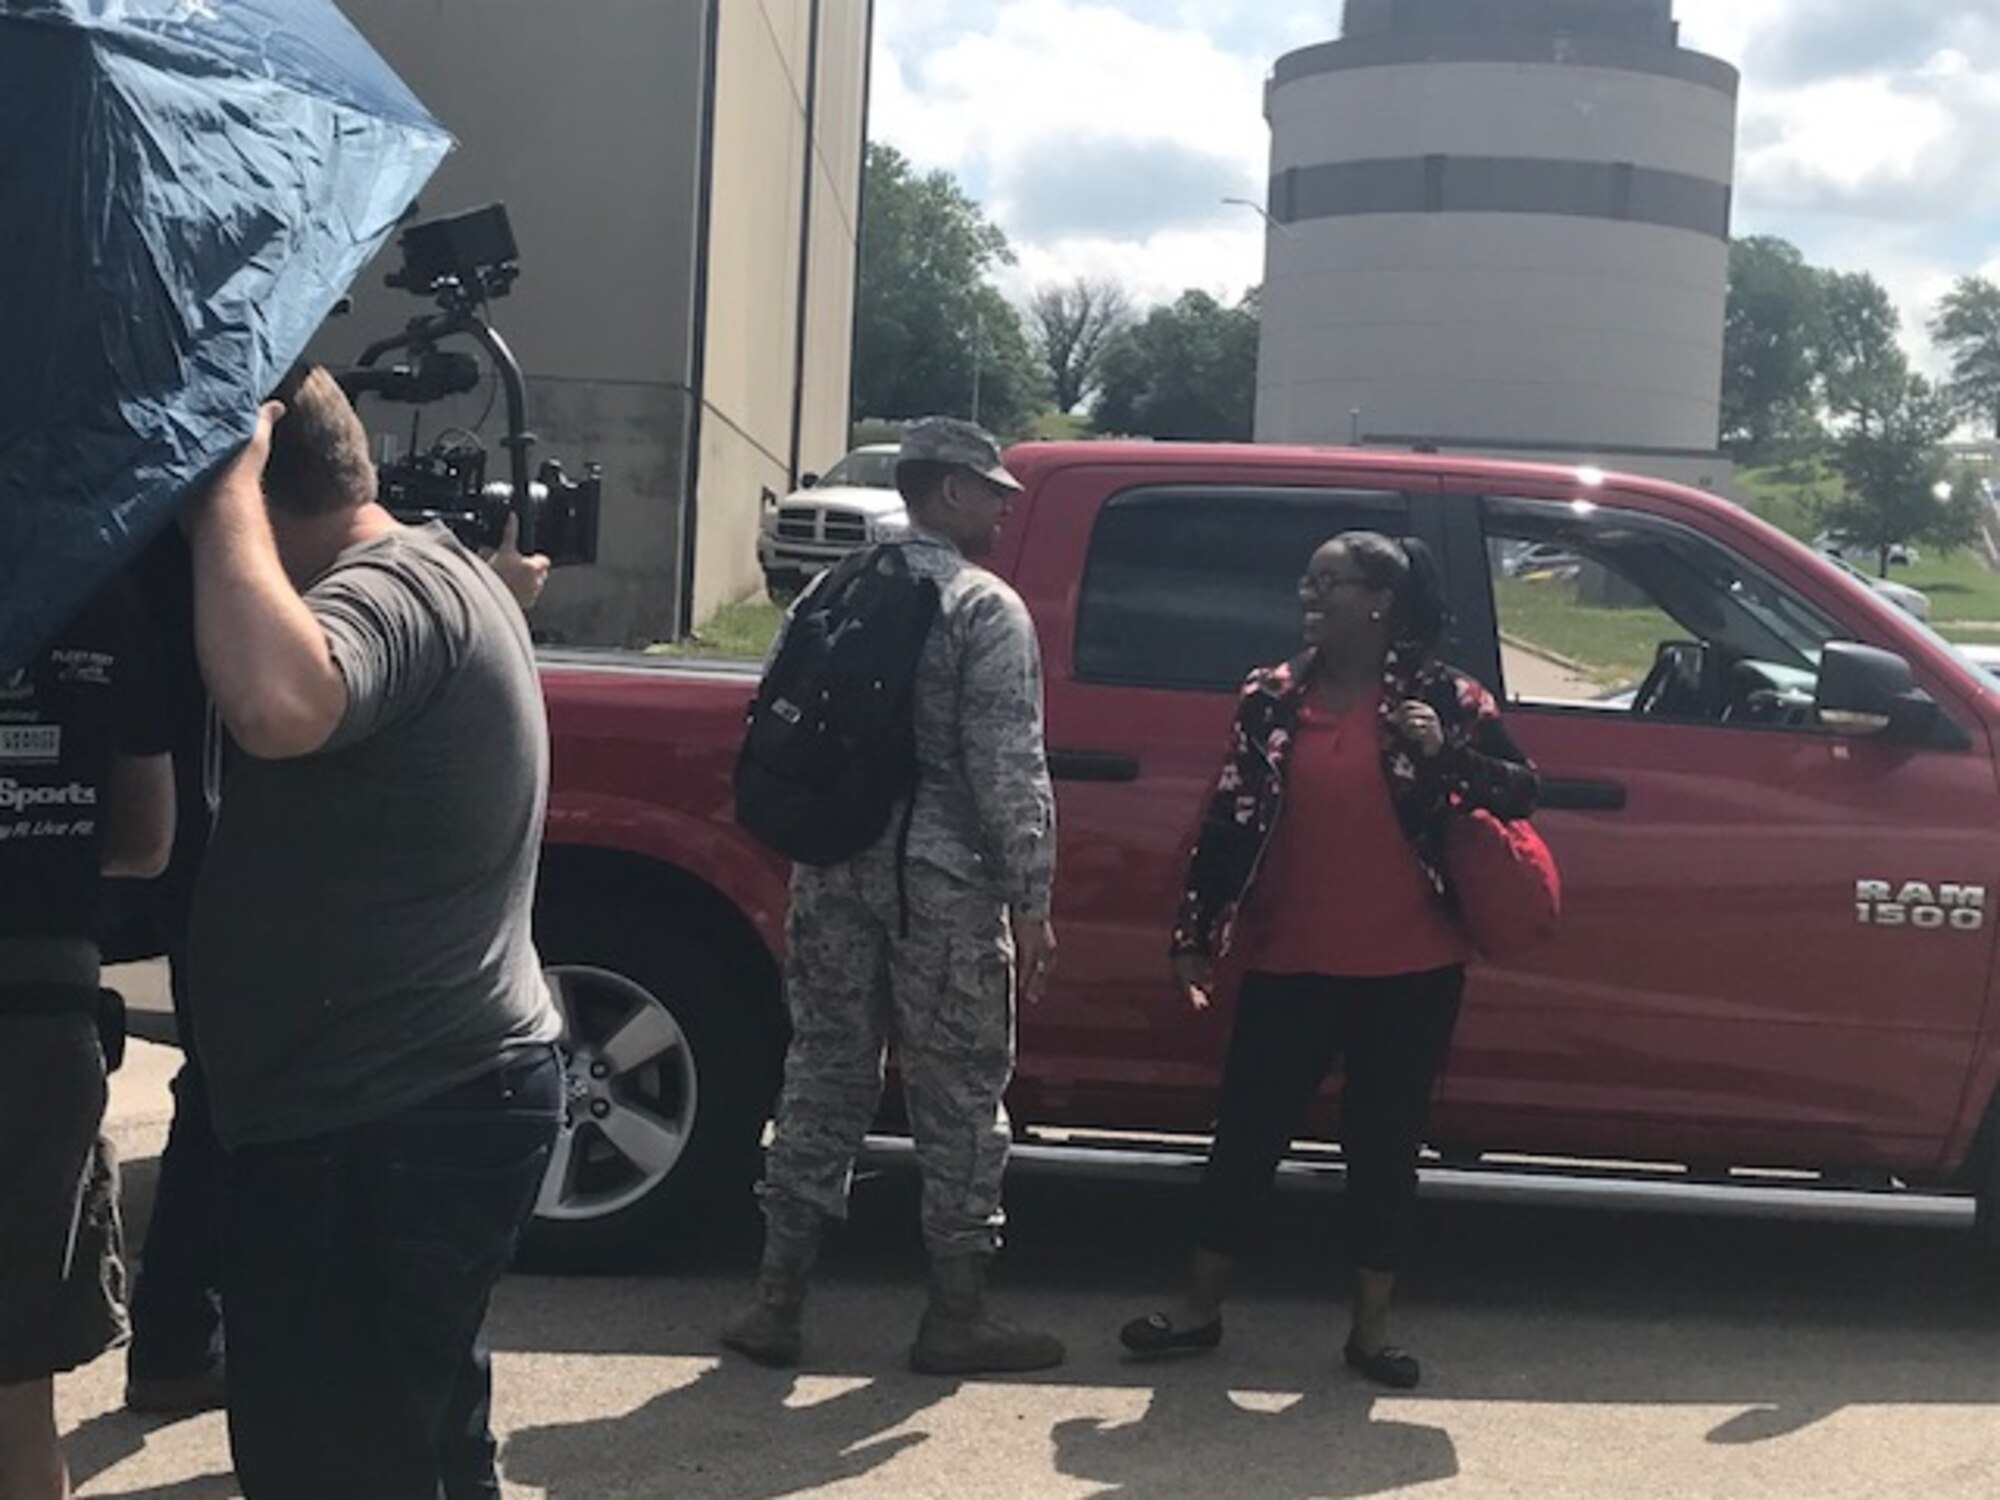 Jasmine Moore, 88th Force Support Squadron education and training Pathway intern, and husband Lt. Calvin Moore, Air Force Life Cycle Management Center program manager, film a scene arriving to work together for the PACE’s “Teamwork” Heritage Today video on June 8, 2017. The video will feature Air Force civilians and their contributions to the Air Force mission. (U.S. Air Force photo/Stacey Geiger)